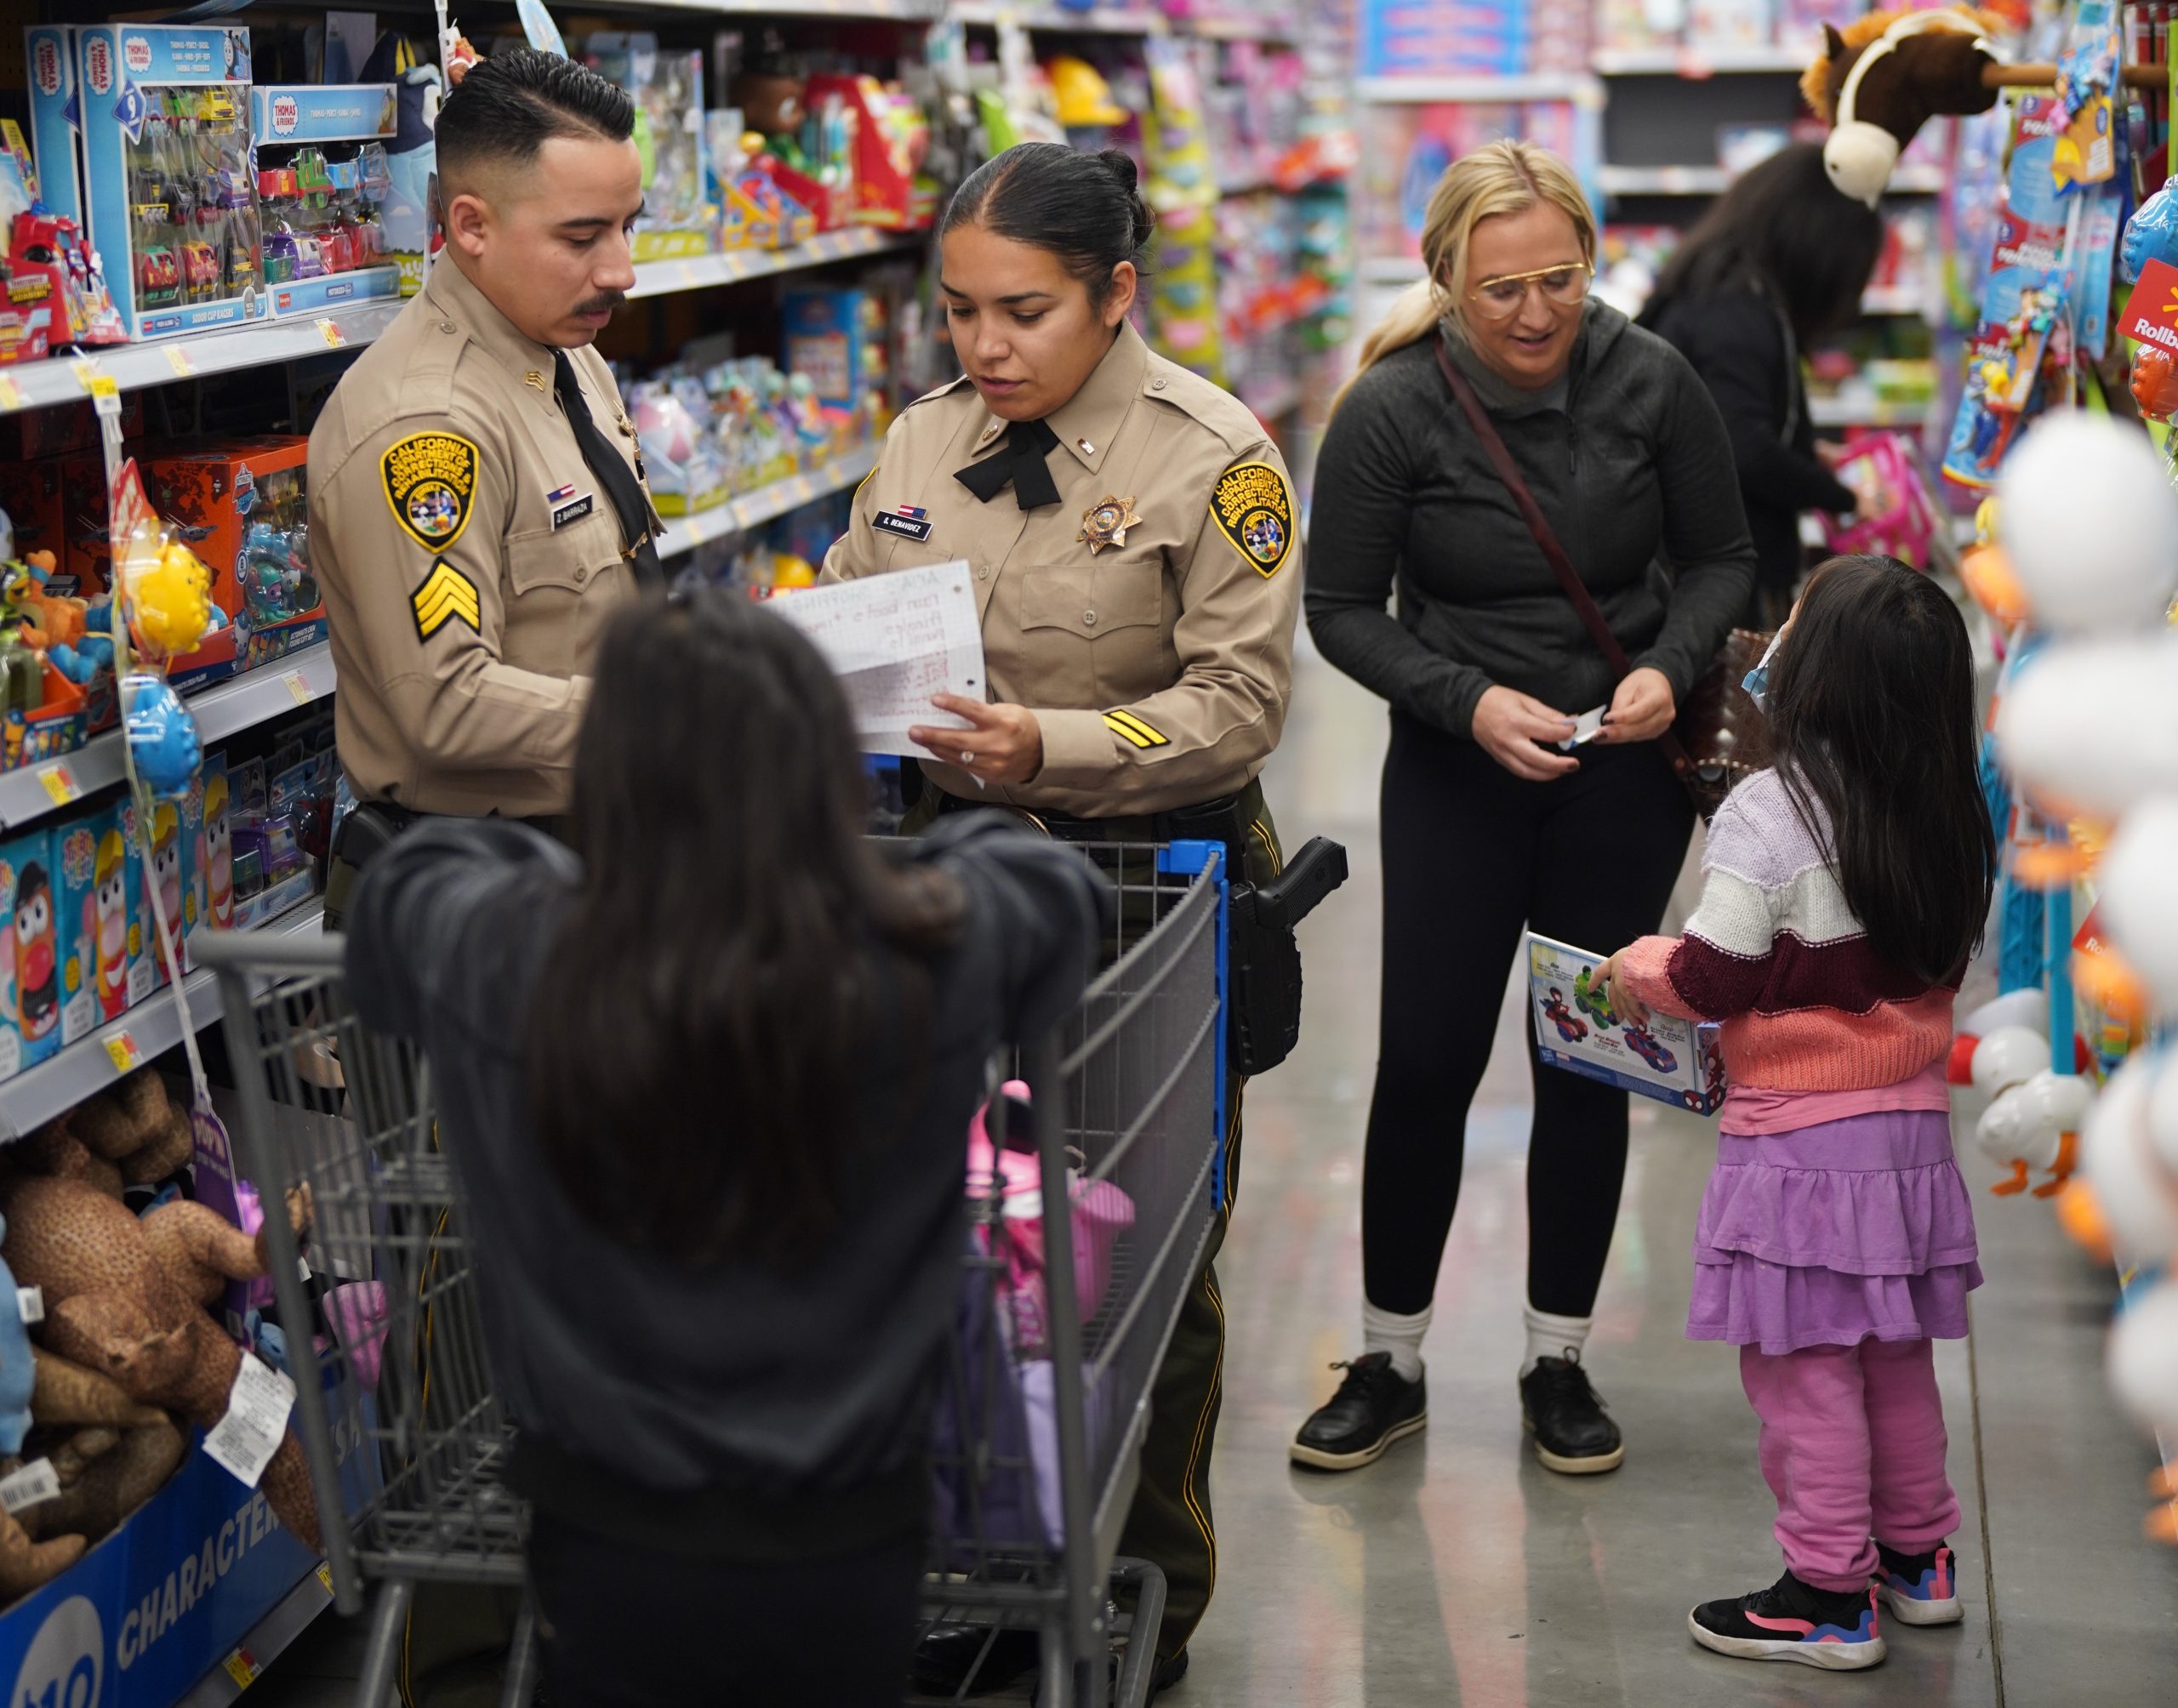 Two people in CDCR uniforms and a person in regular clothes with two children in a store.